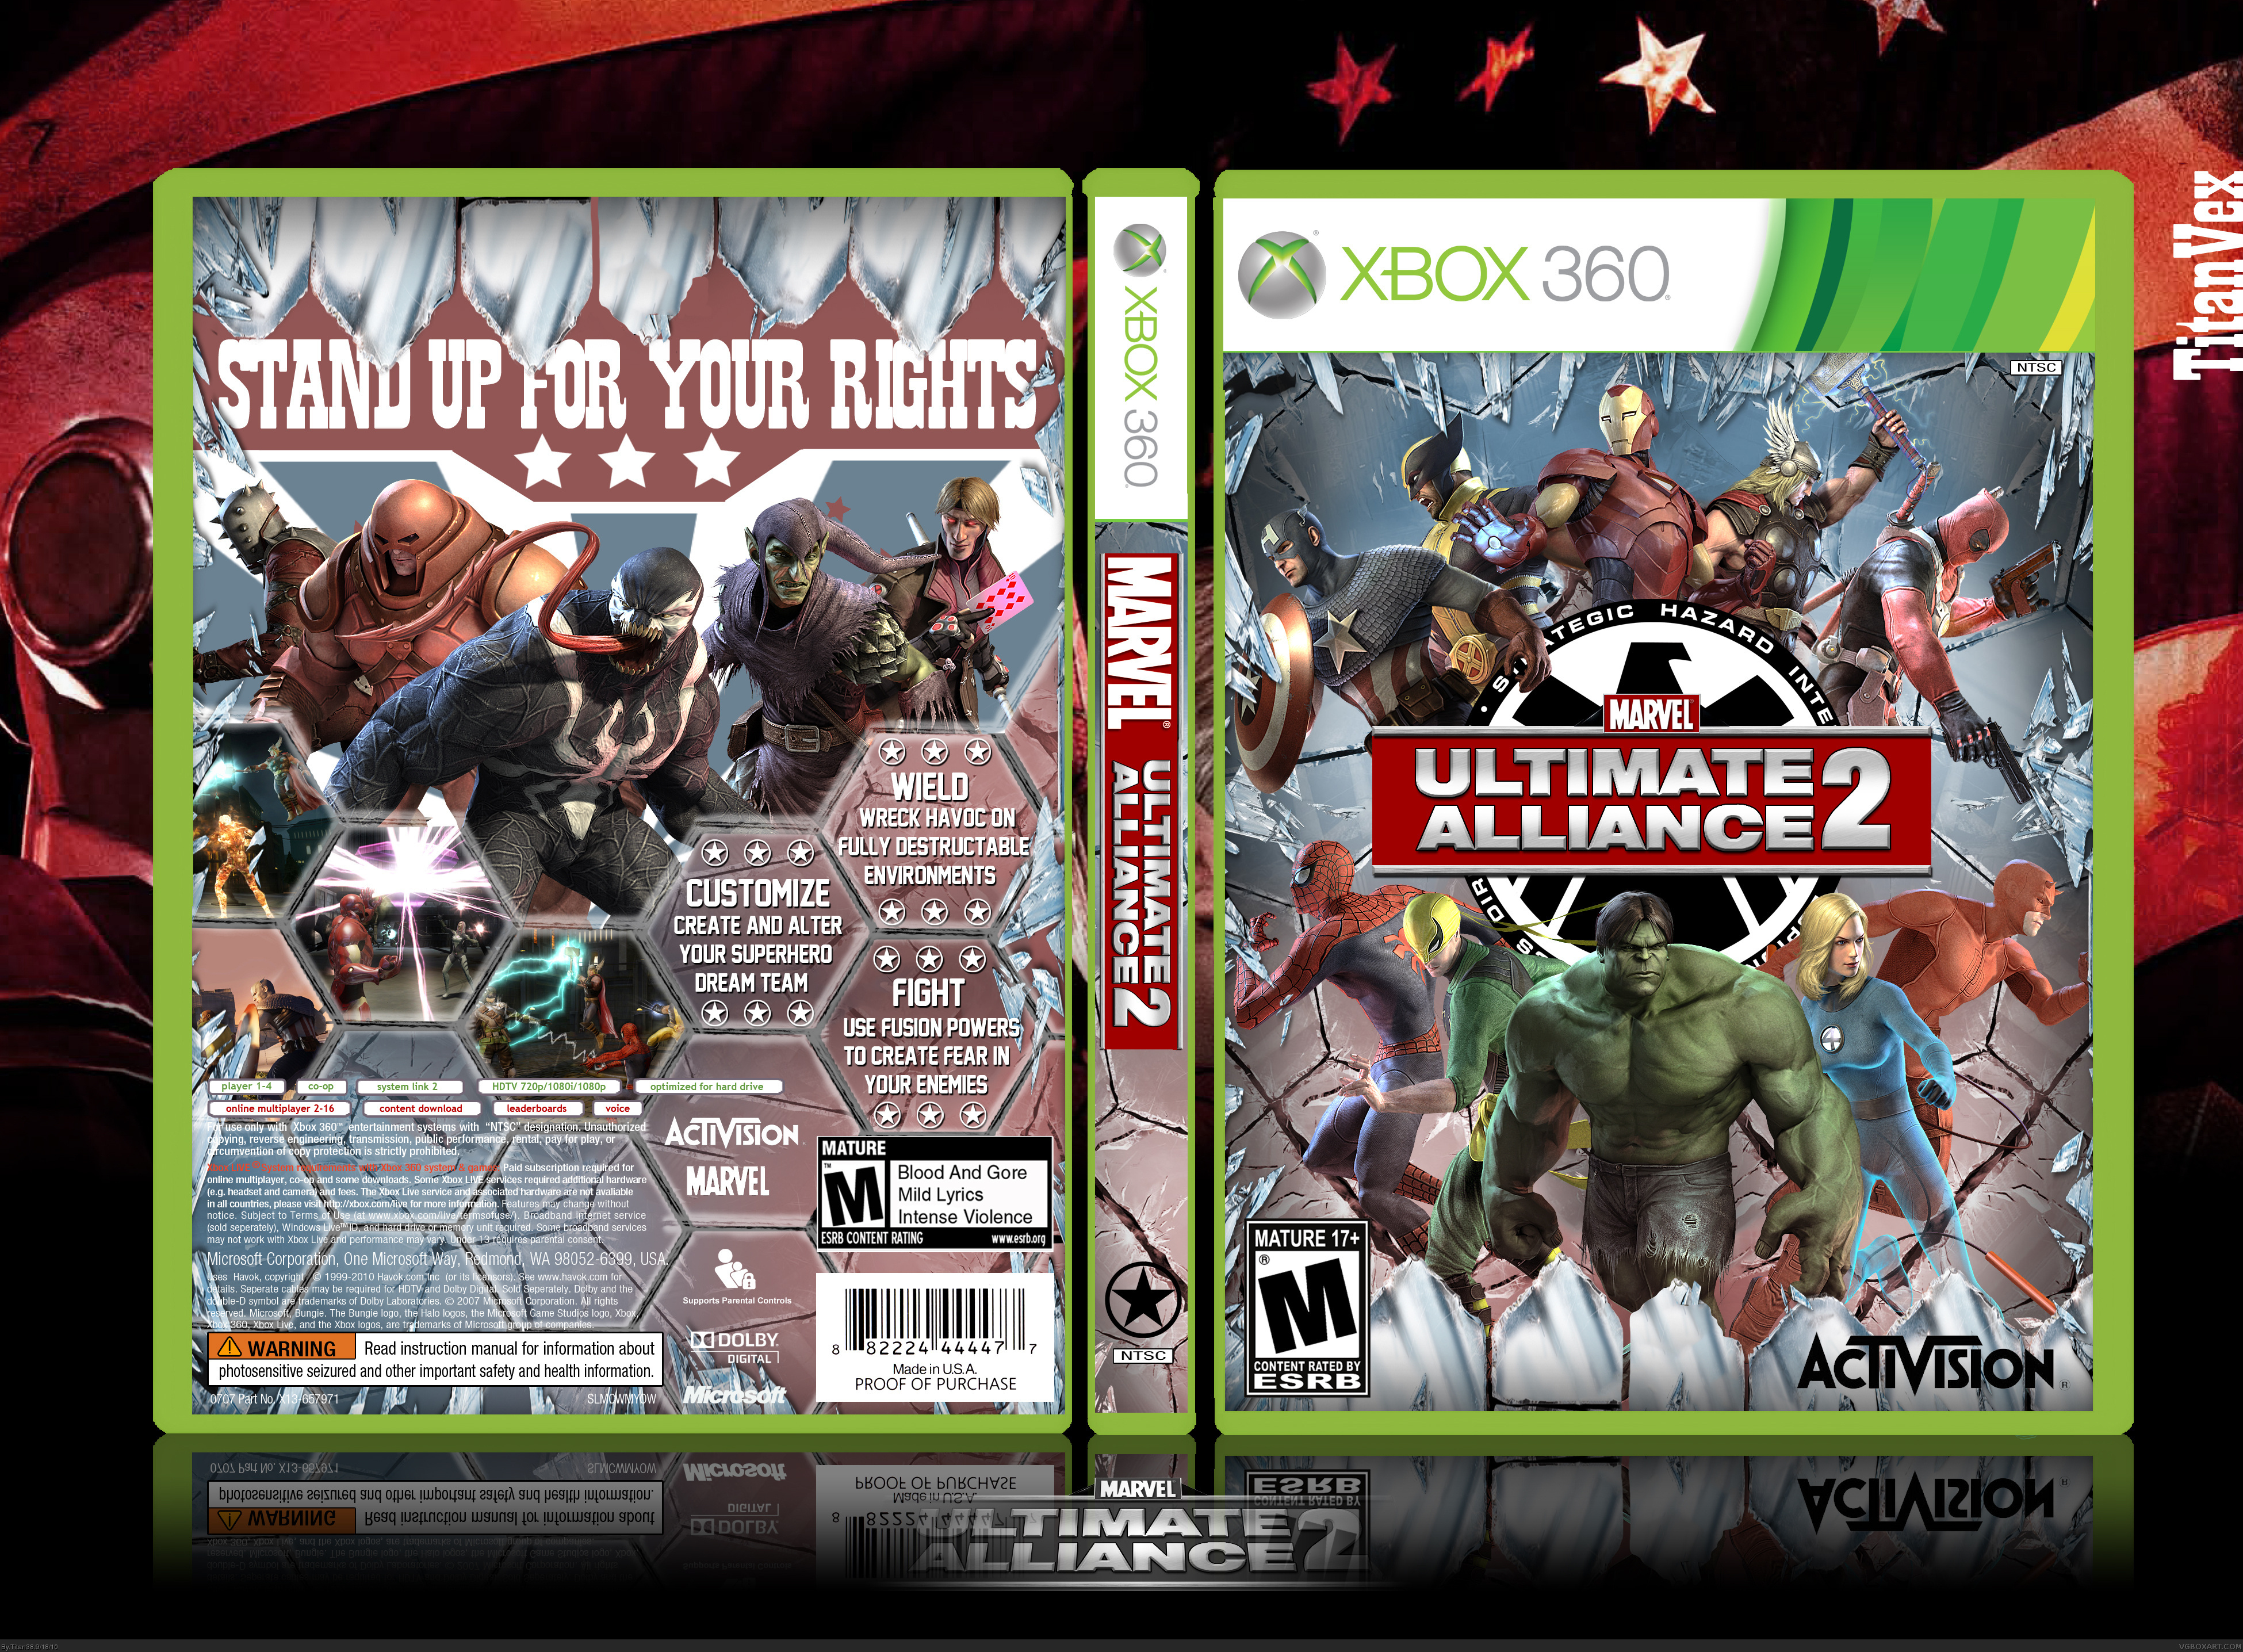 Marvel Ultimate Alliance 2 box cover